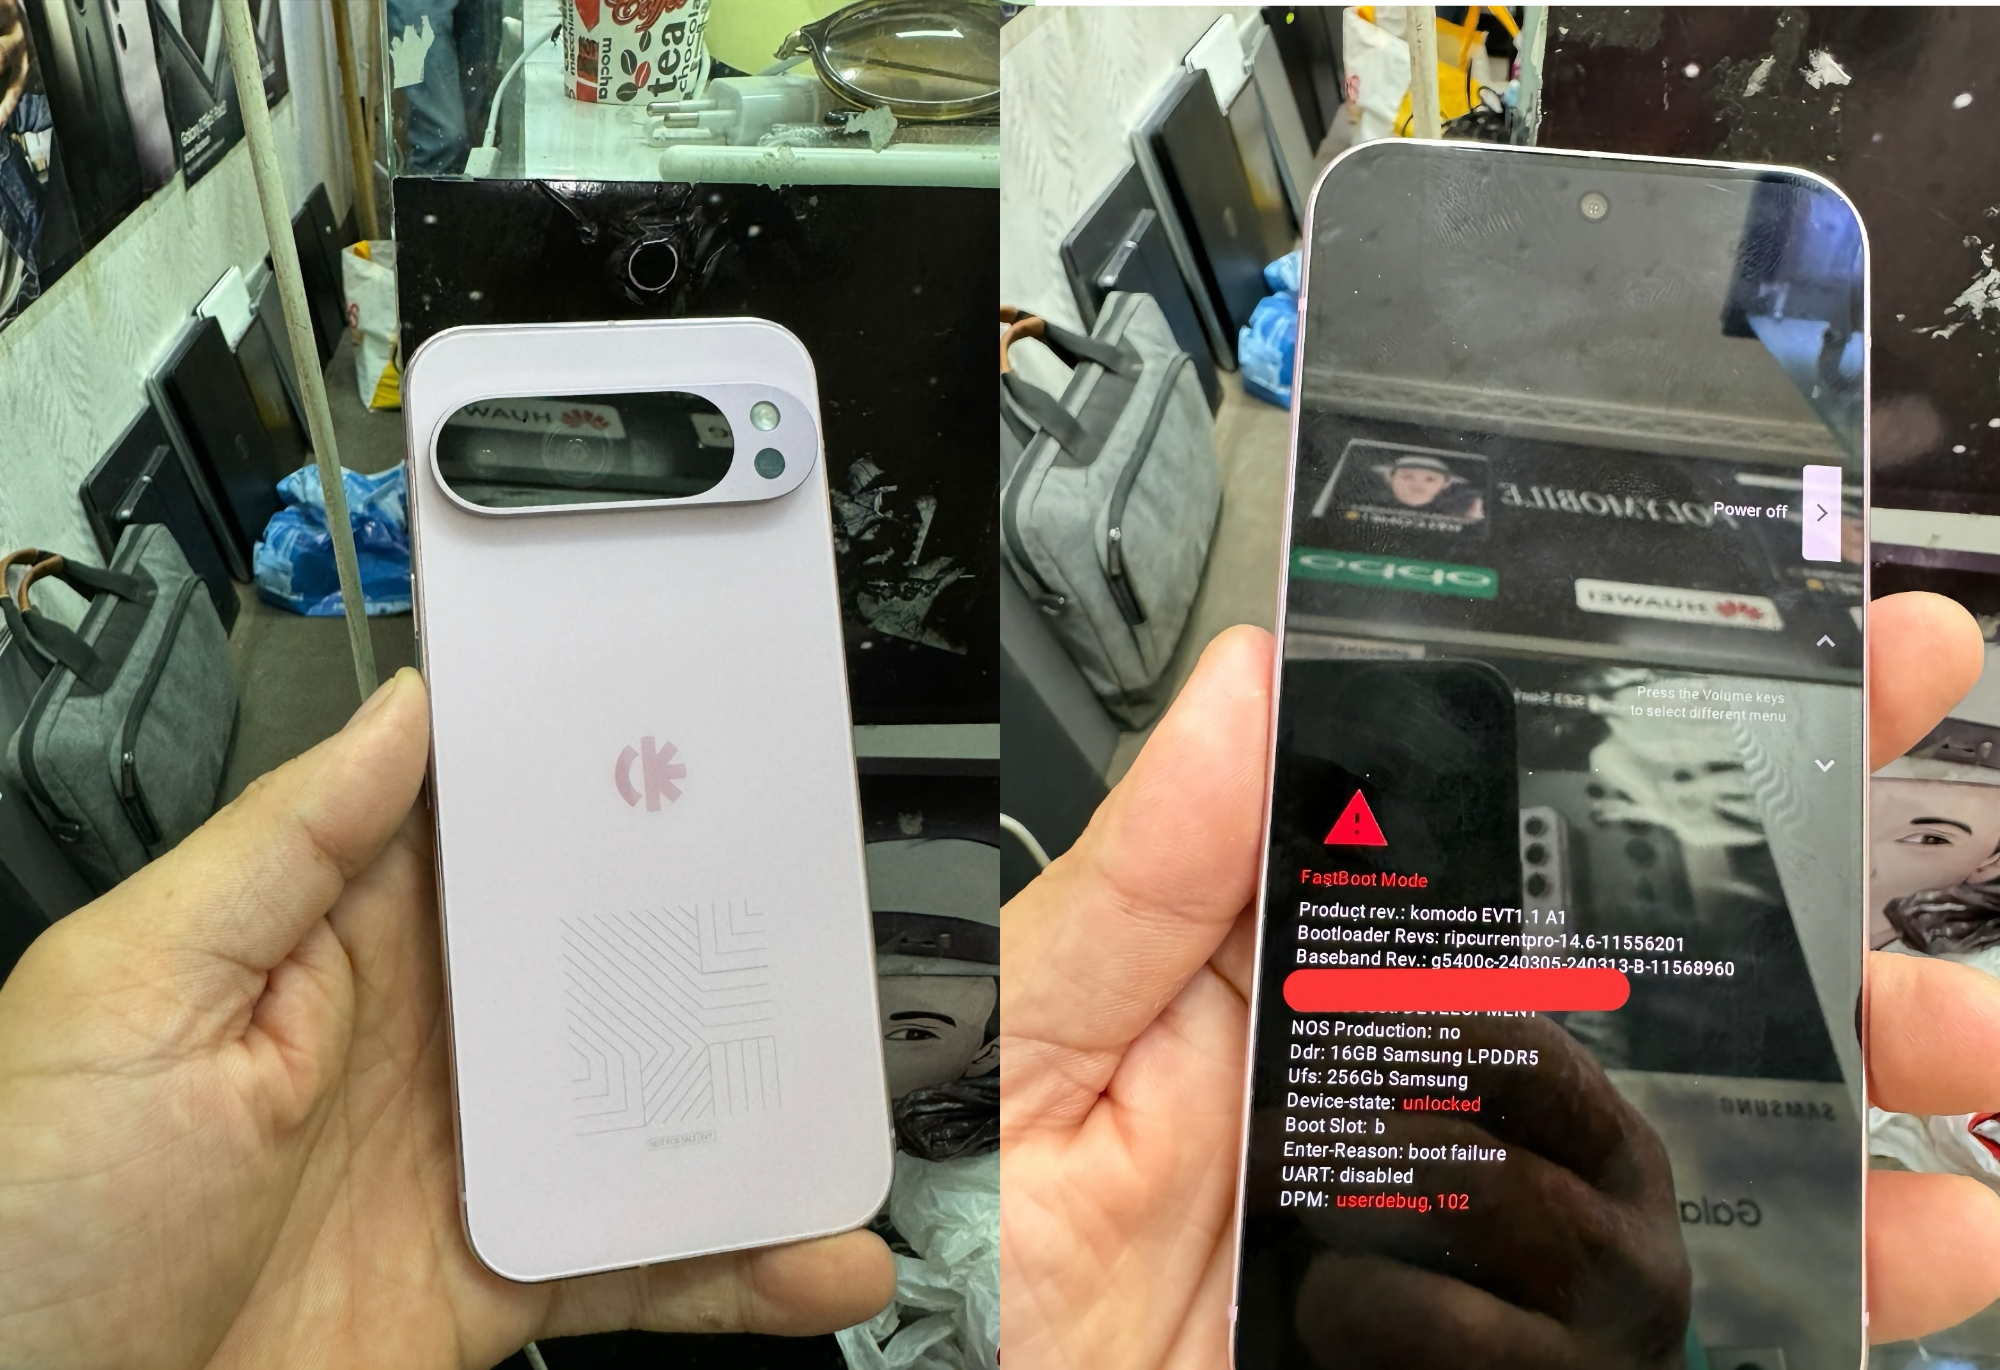 16GB RAM, 256GB ROM and Exynos 5400 modem: Google Pixel 9 Pro XL prototype photos have surfaced online